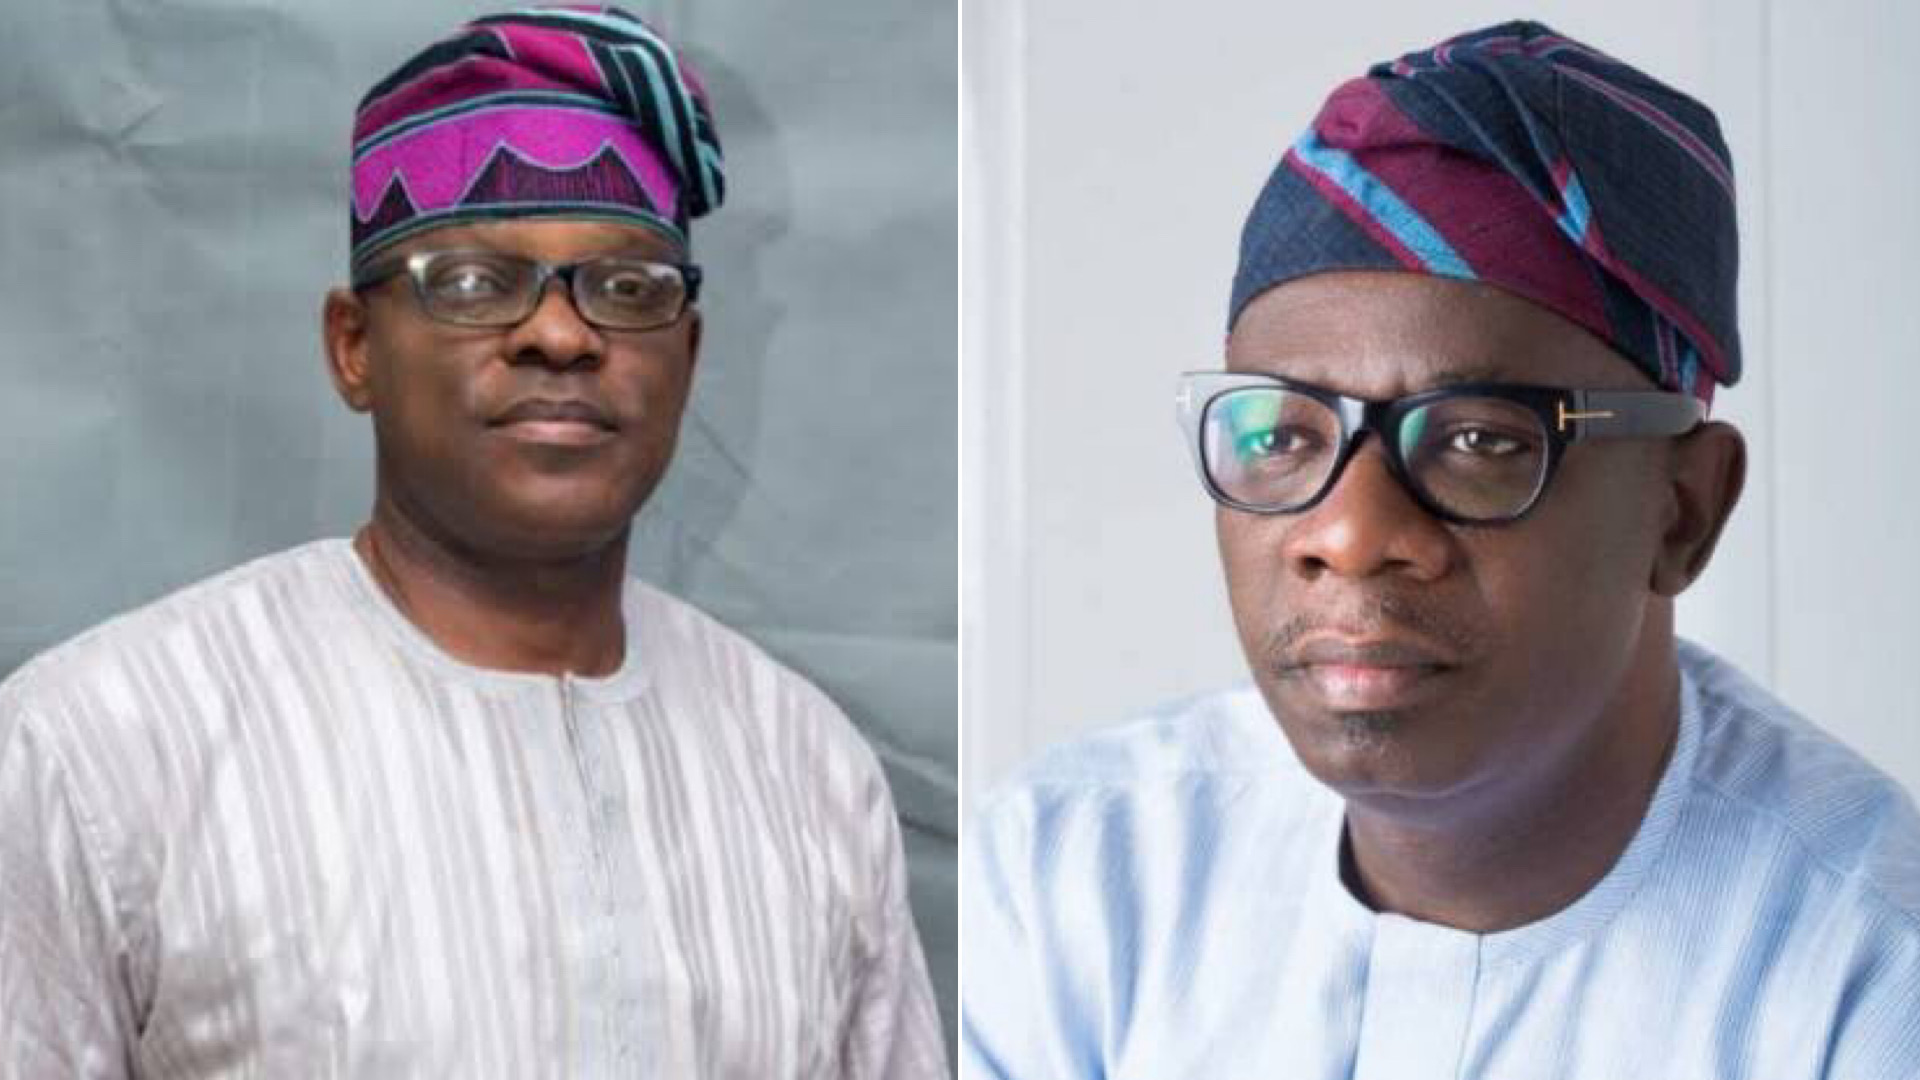 L-R: Candidate of the Peoples Democratic Party in the October 10 governorship election in Ondo State, Mr Eyitayo Jegede and Zenith Labor Party candidate, Agboola Ajayi